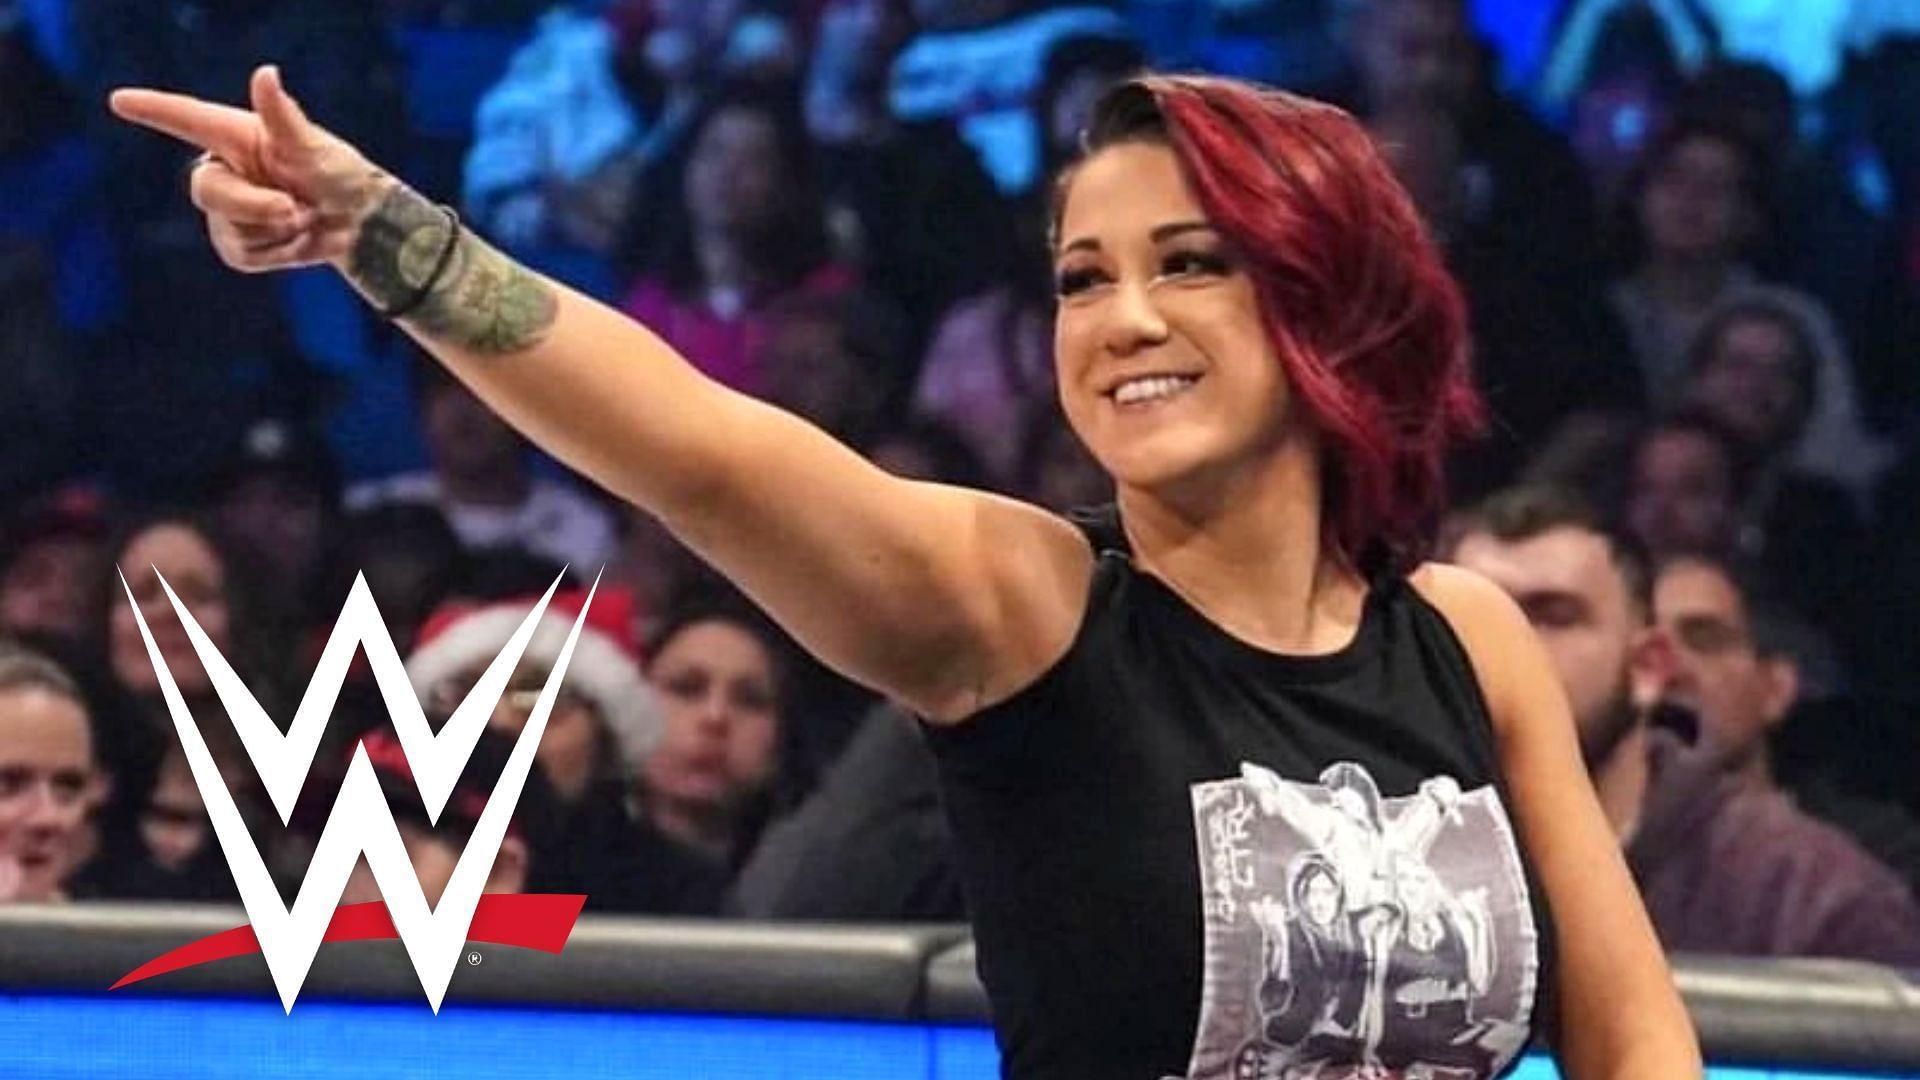 Bayley has a big match ahead of her at WrestleMania 39.